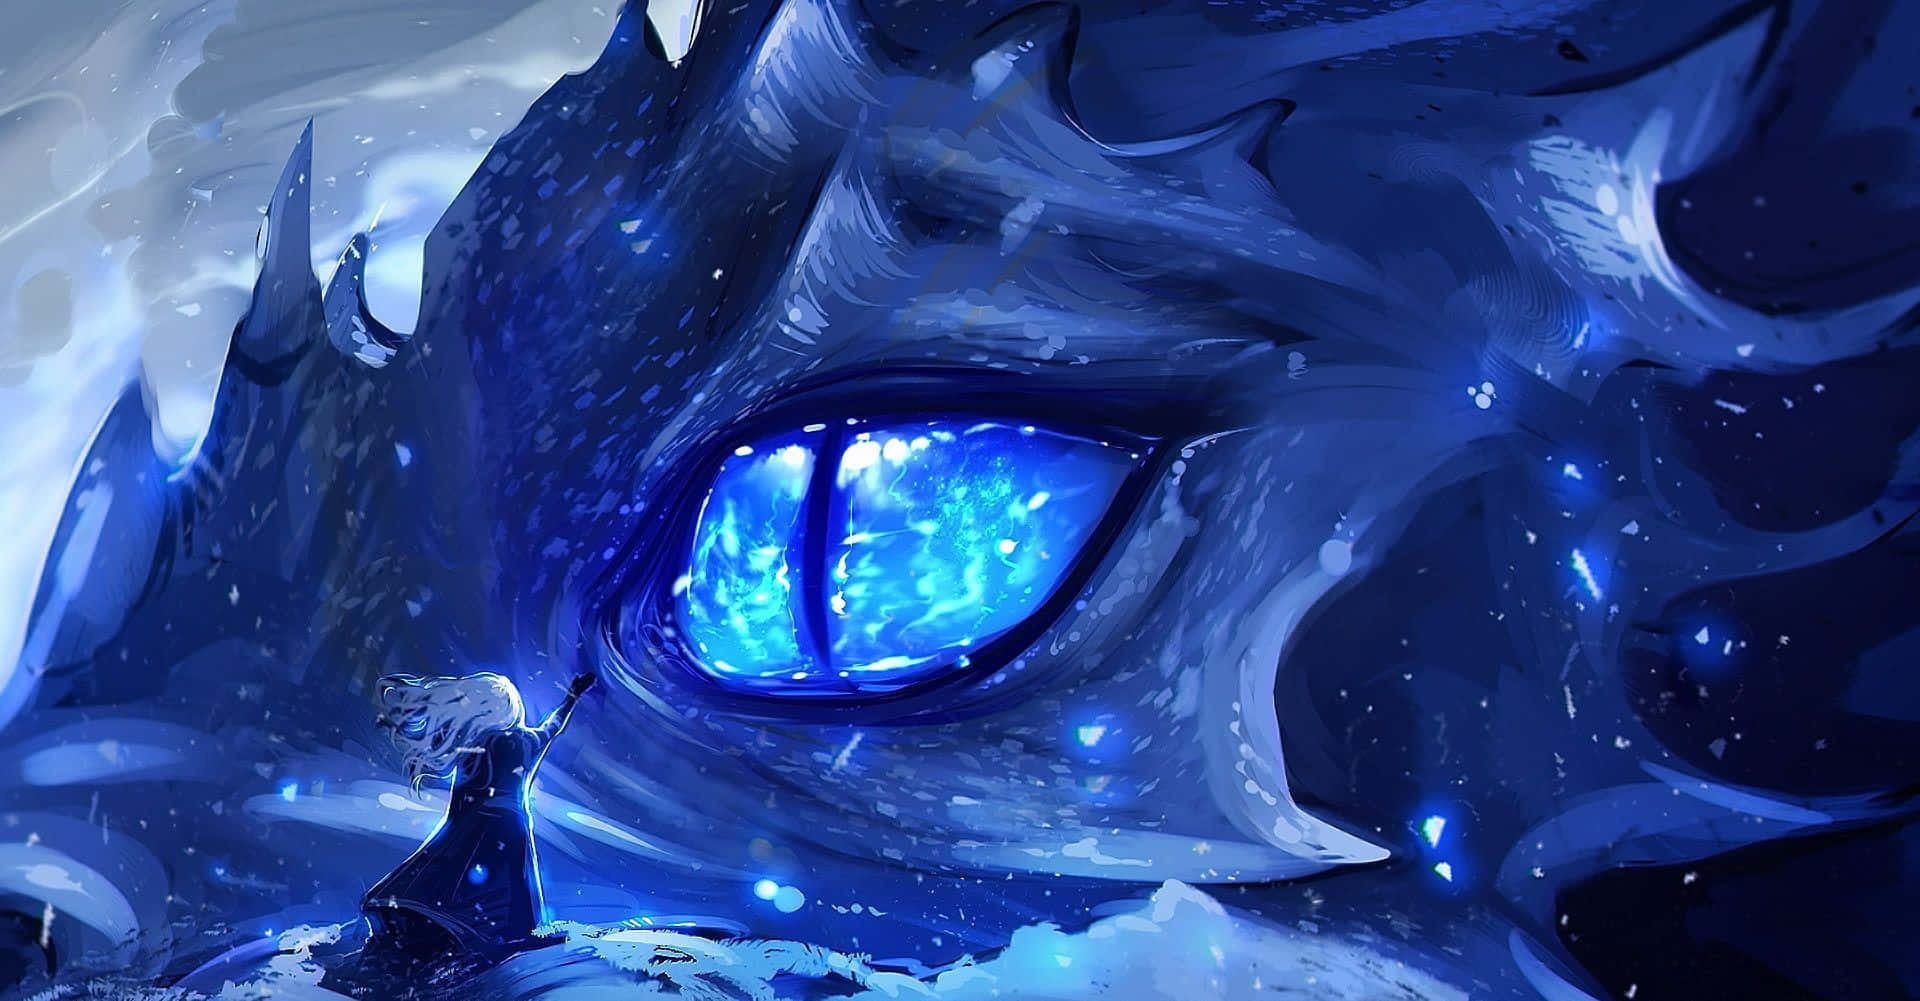 “The Epic Dragon Stands Defiantly Against All Odds” Wallpaper